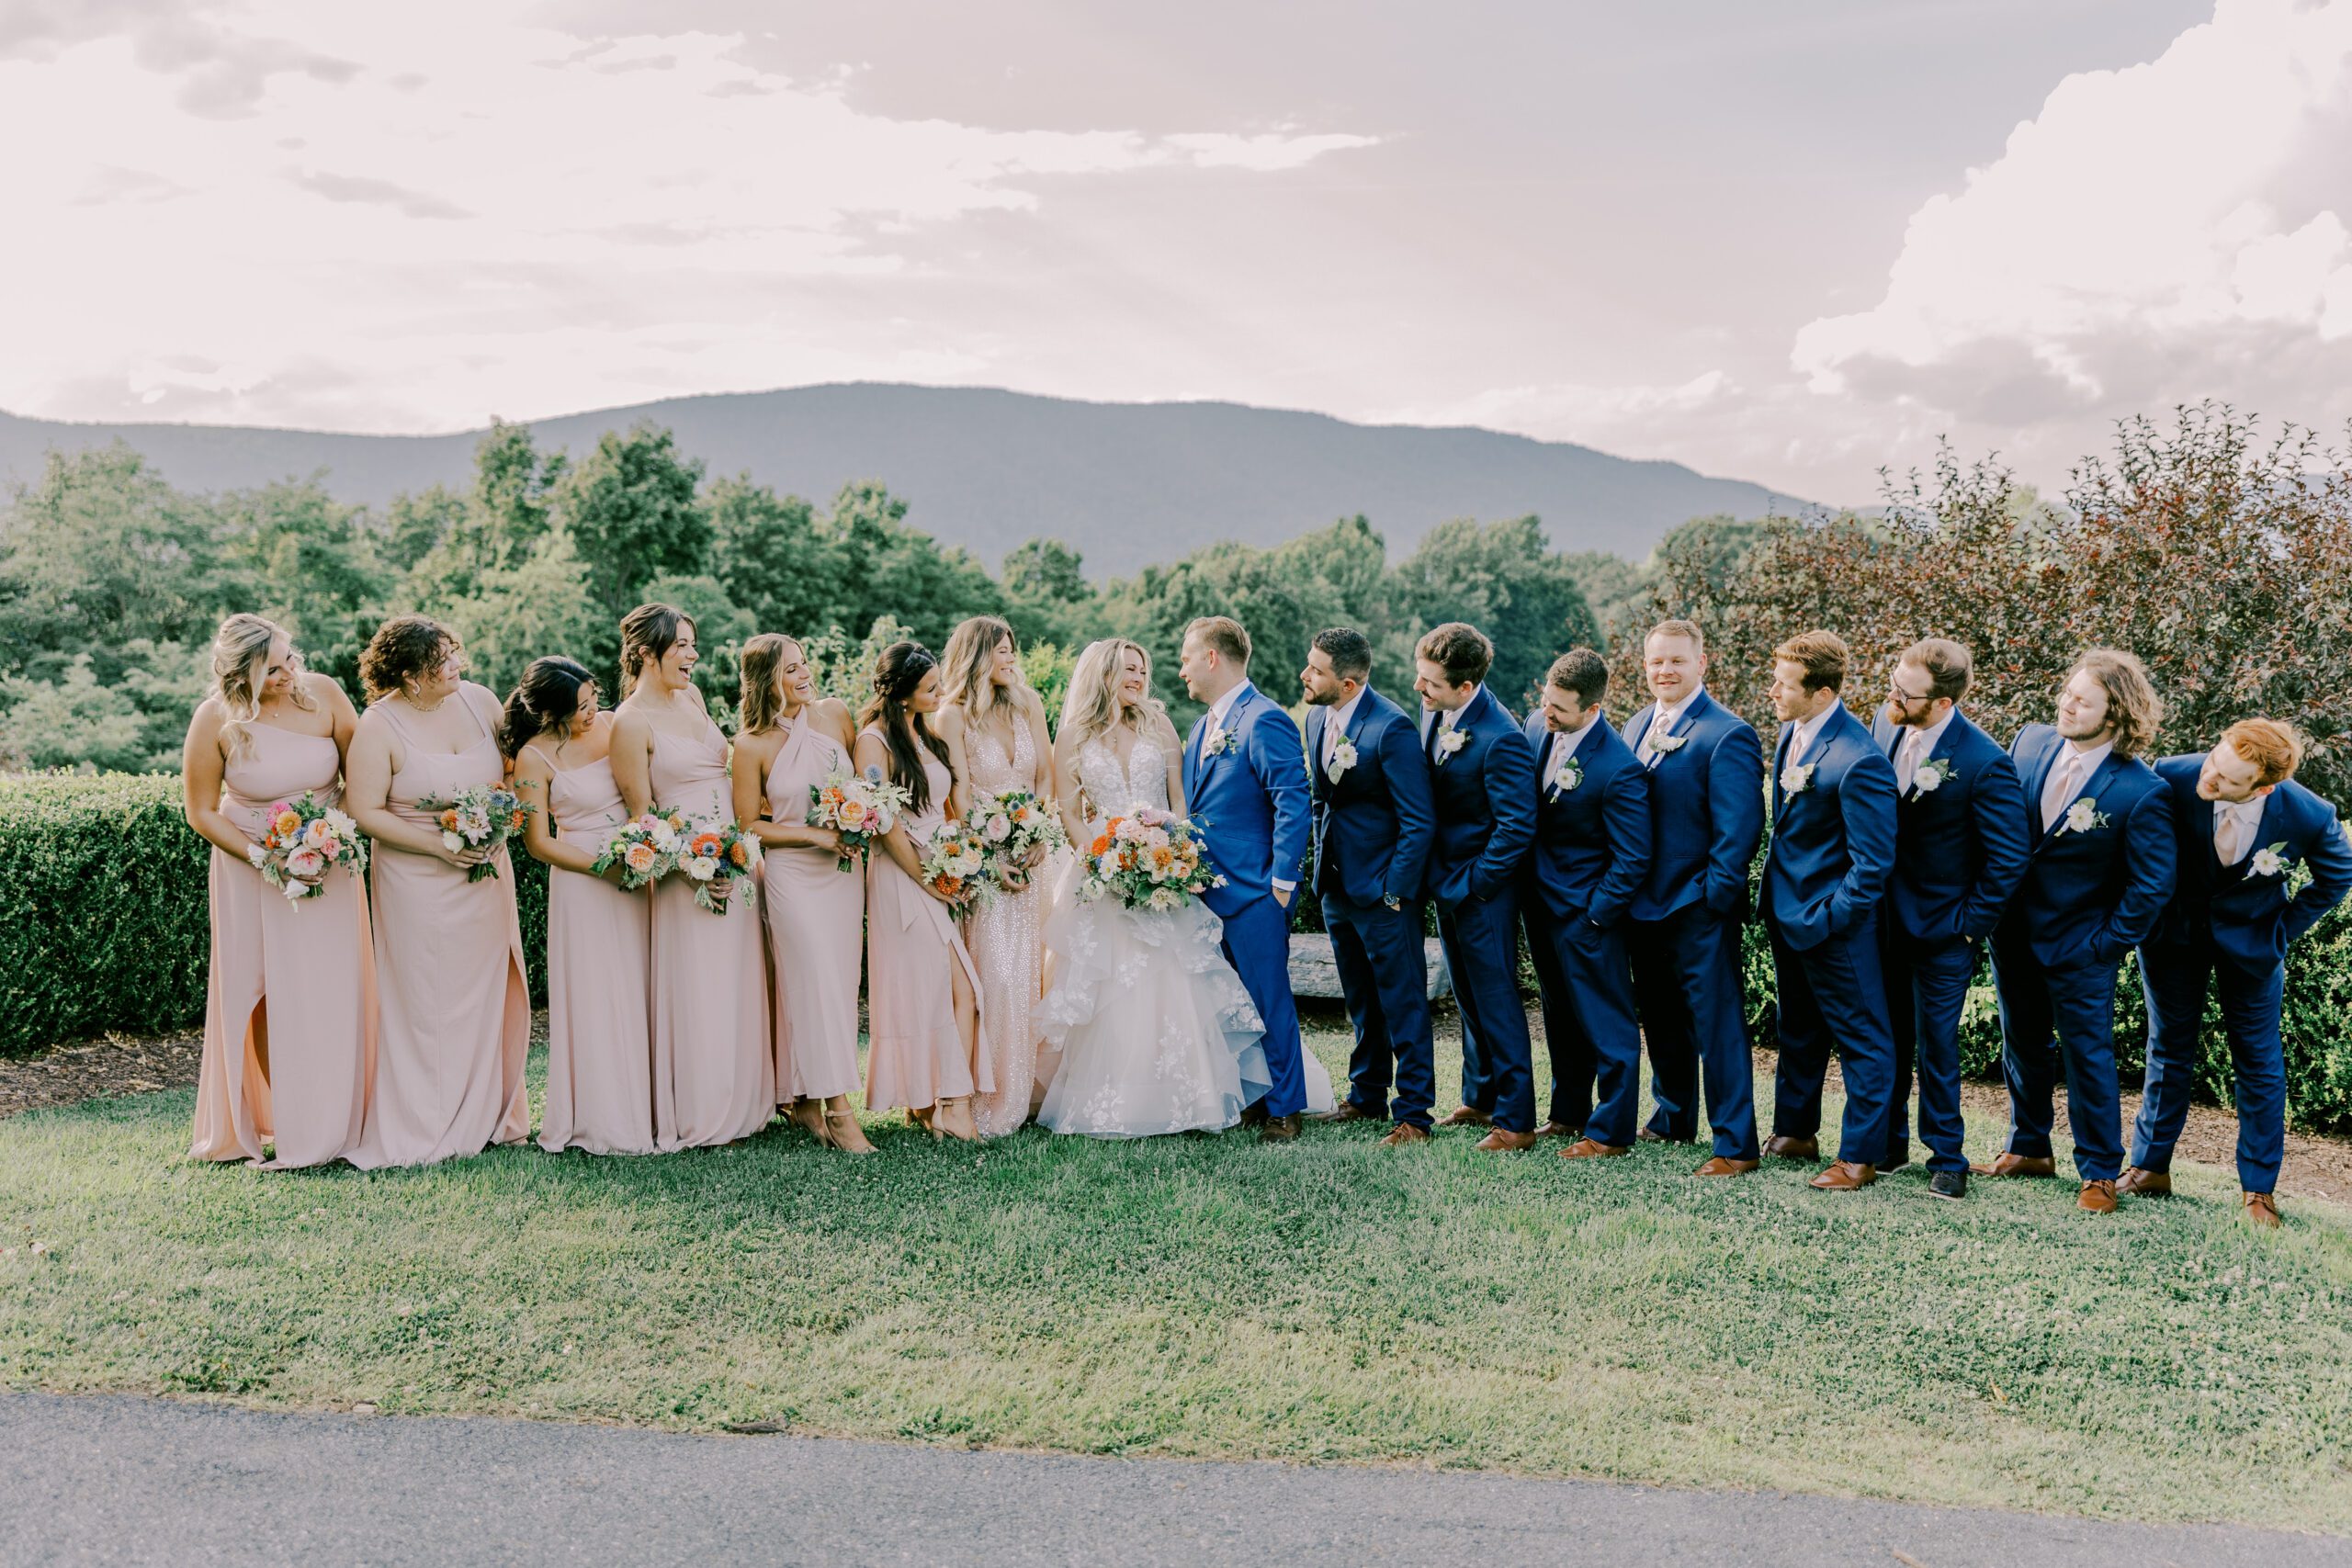 Full wedding party photo standing in grassy area outside at irvine estate summer wedding, bridesmaids all in pink dresses, groomsmen in blue suits.